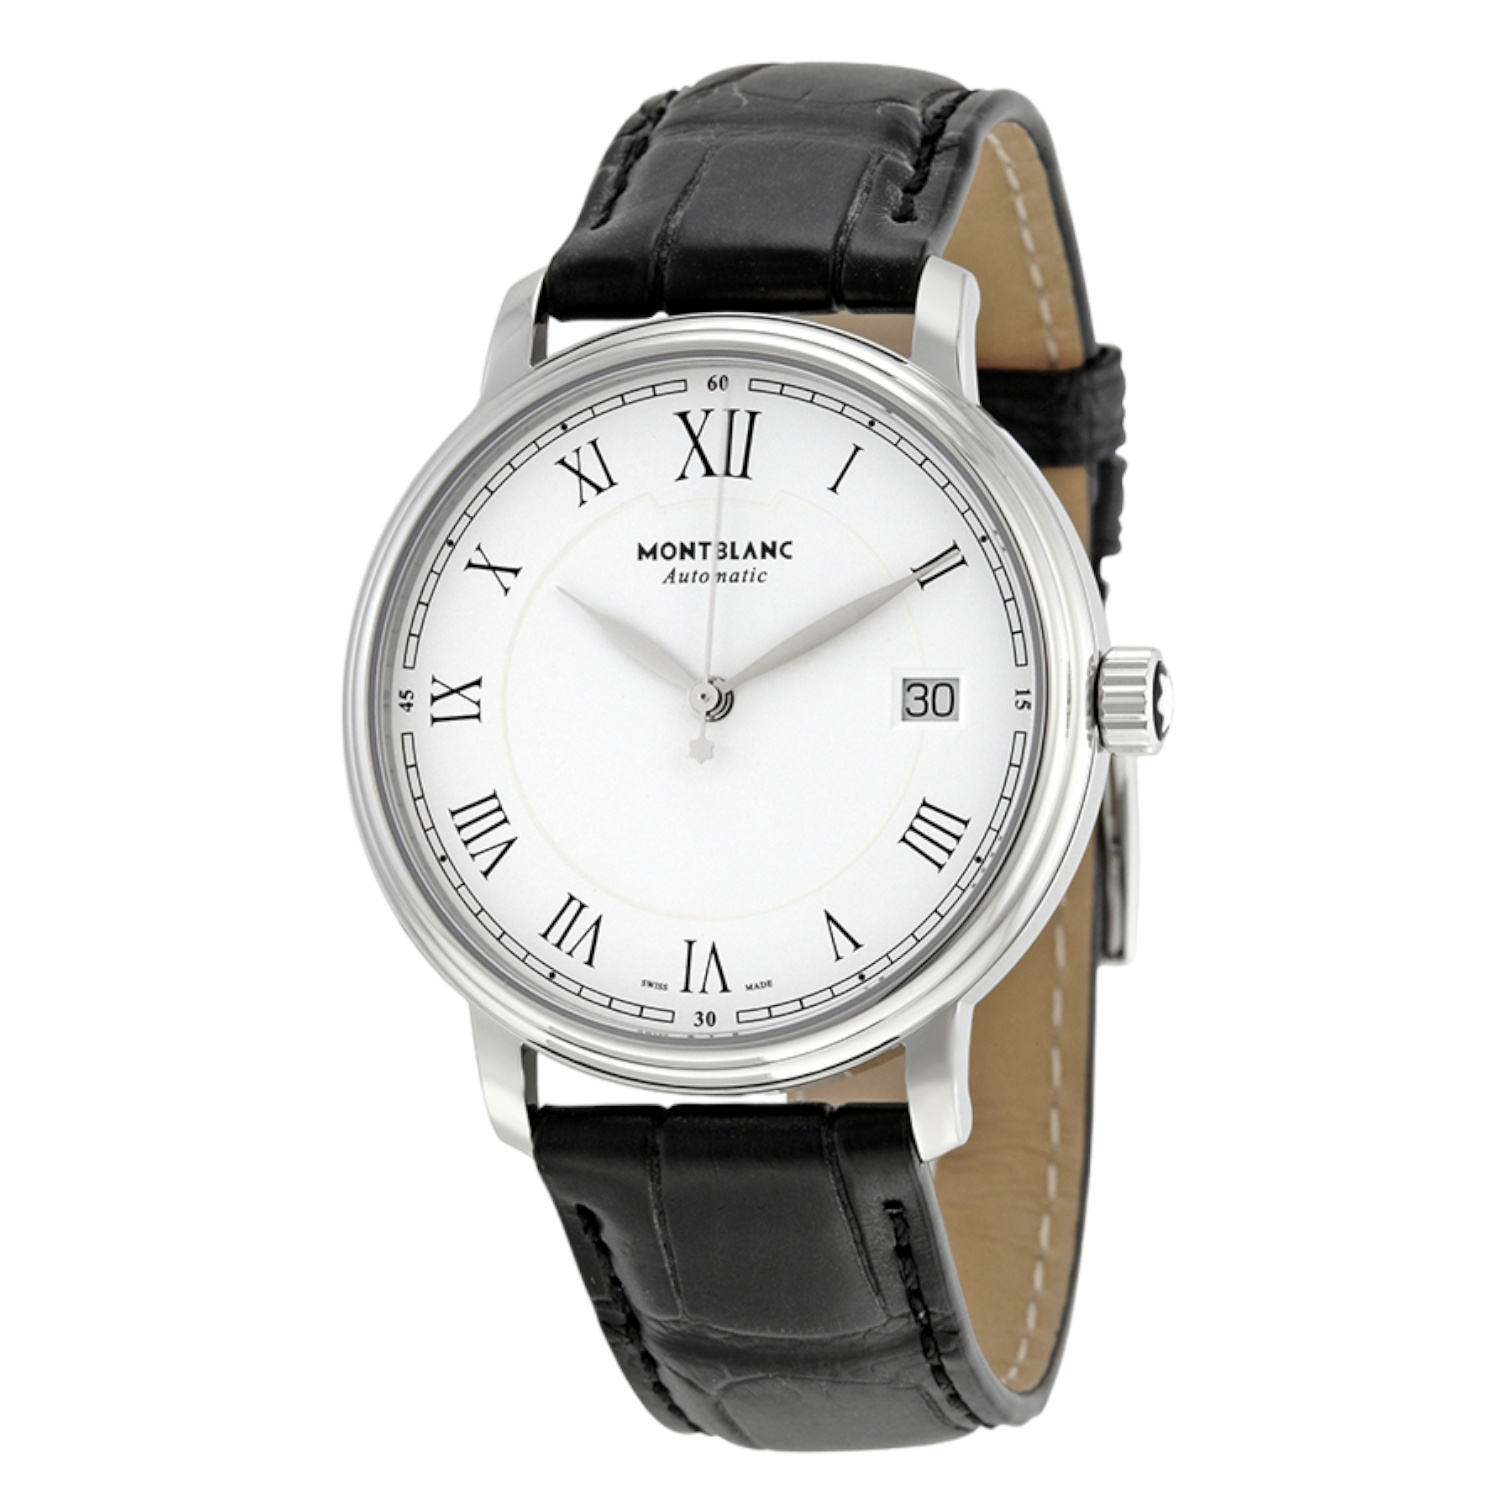 Montblanc Tradition Date Ref. 112611 - ON6226